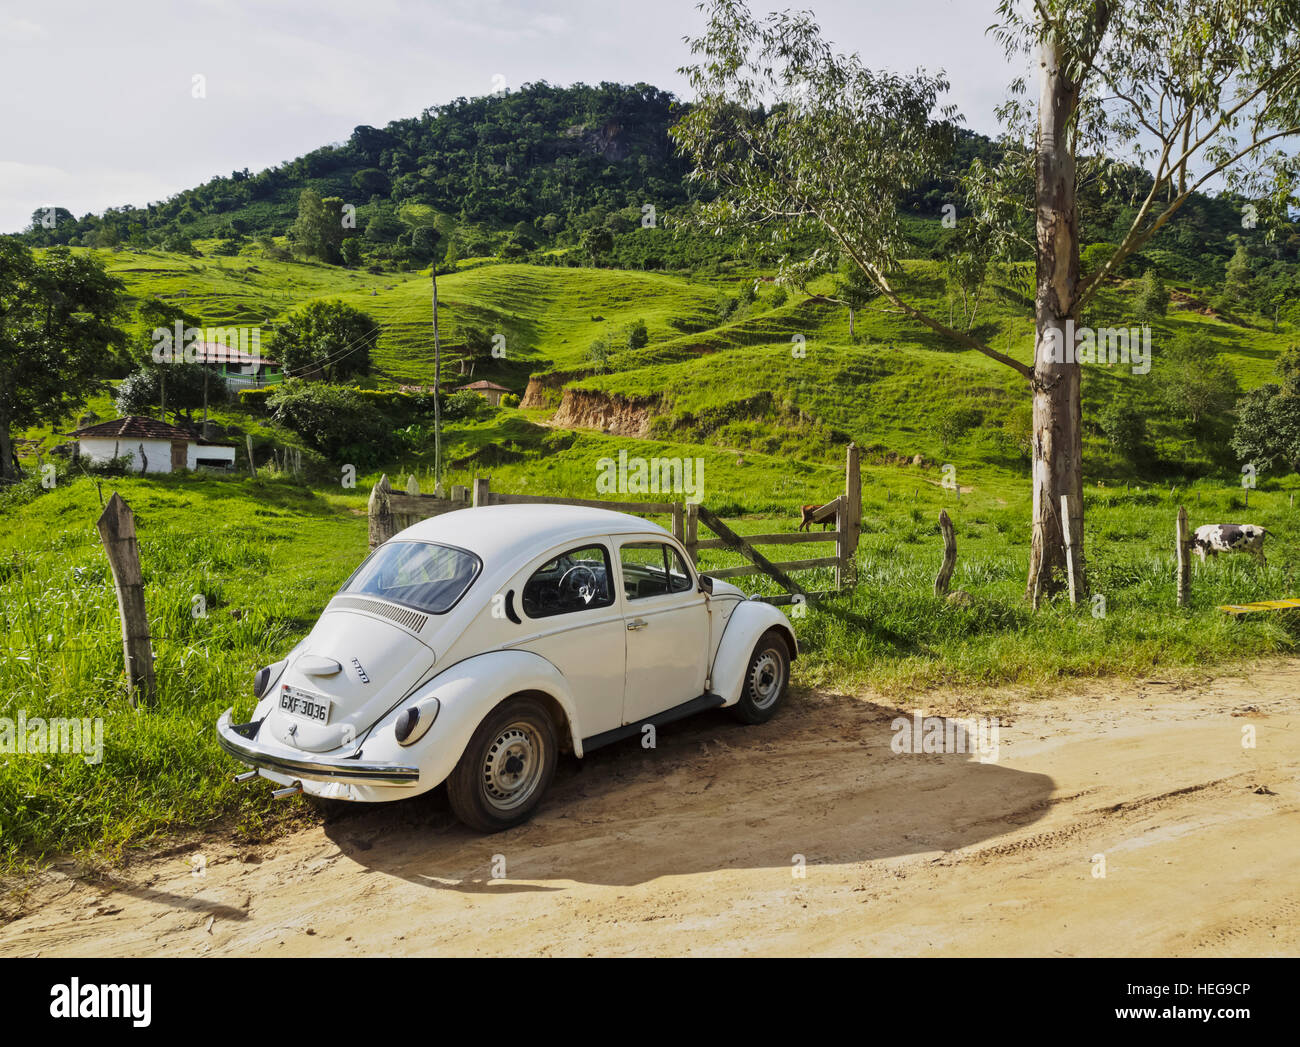 Brazil, State of Minas Gerais, Heliodora, Vintage Volkswagen Beetle on the countryside road. Stock Photo